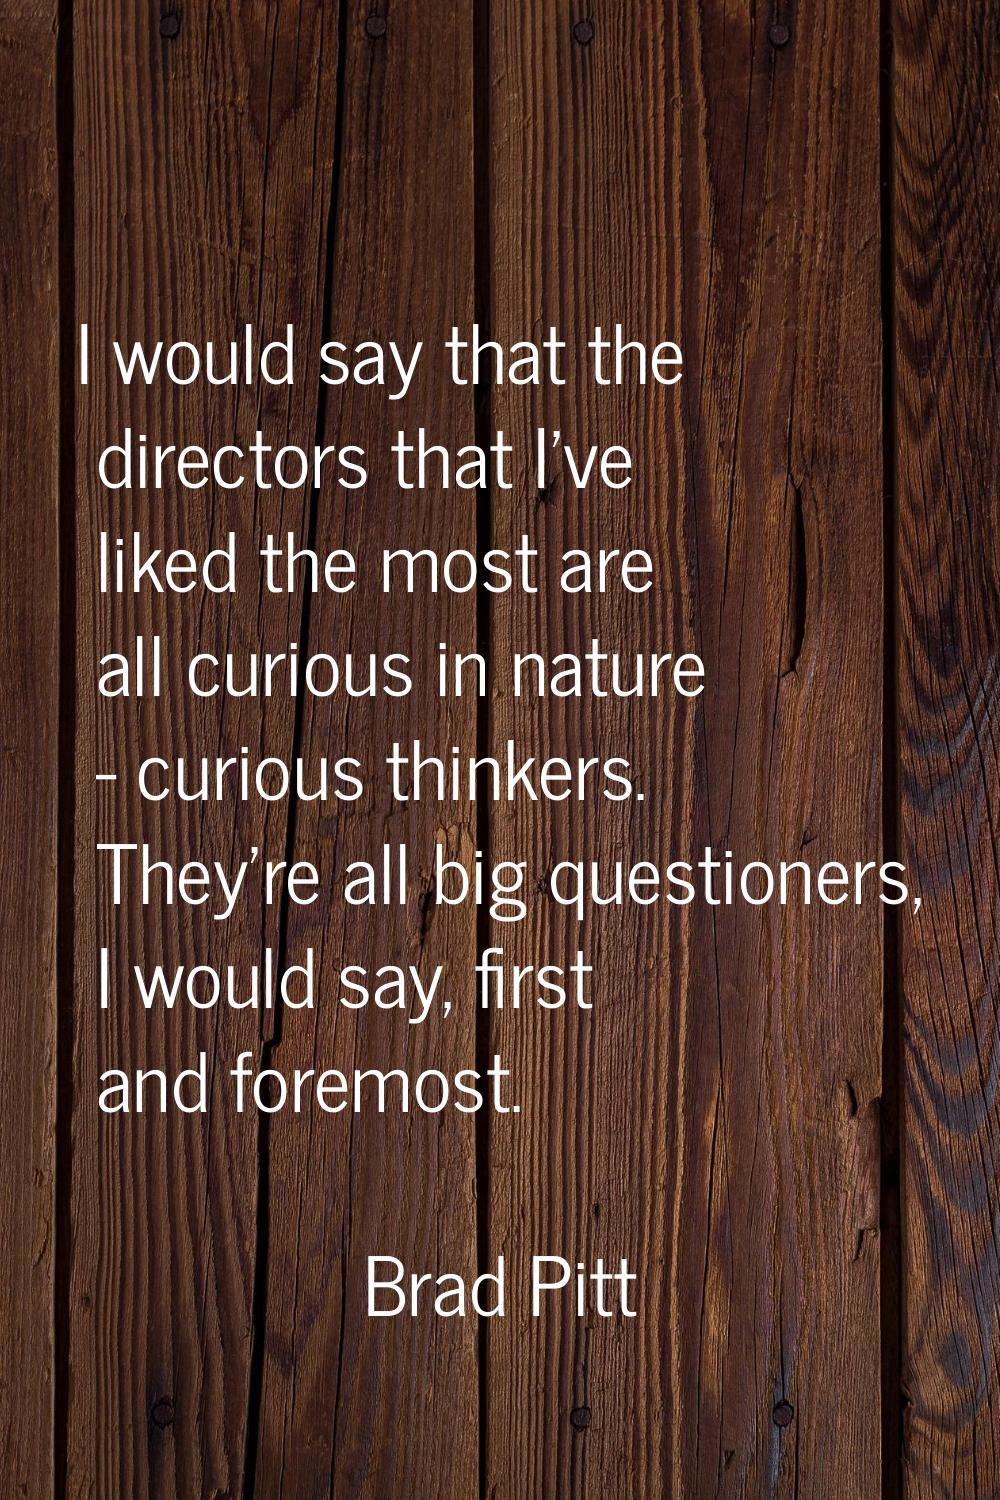 I would say that the directors that I've liked the most are all curious in nature - curious thinker